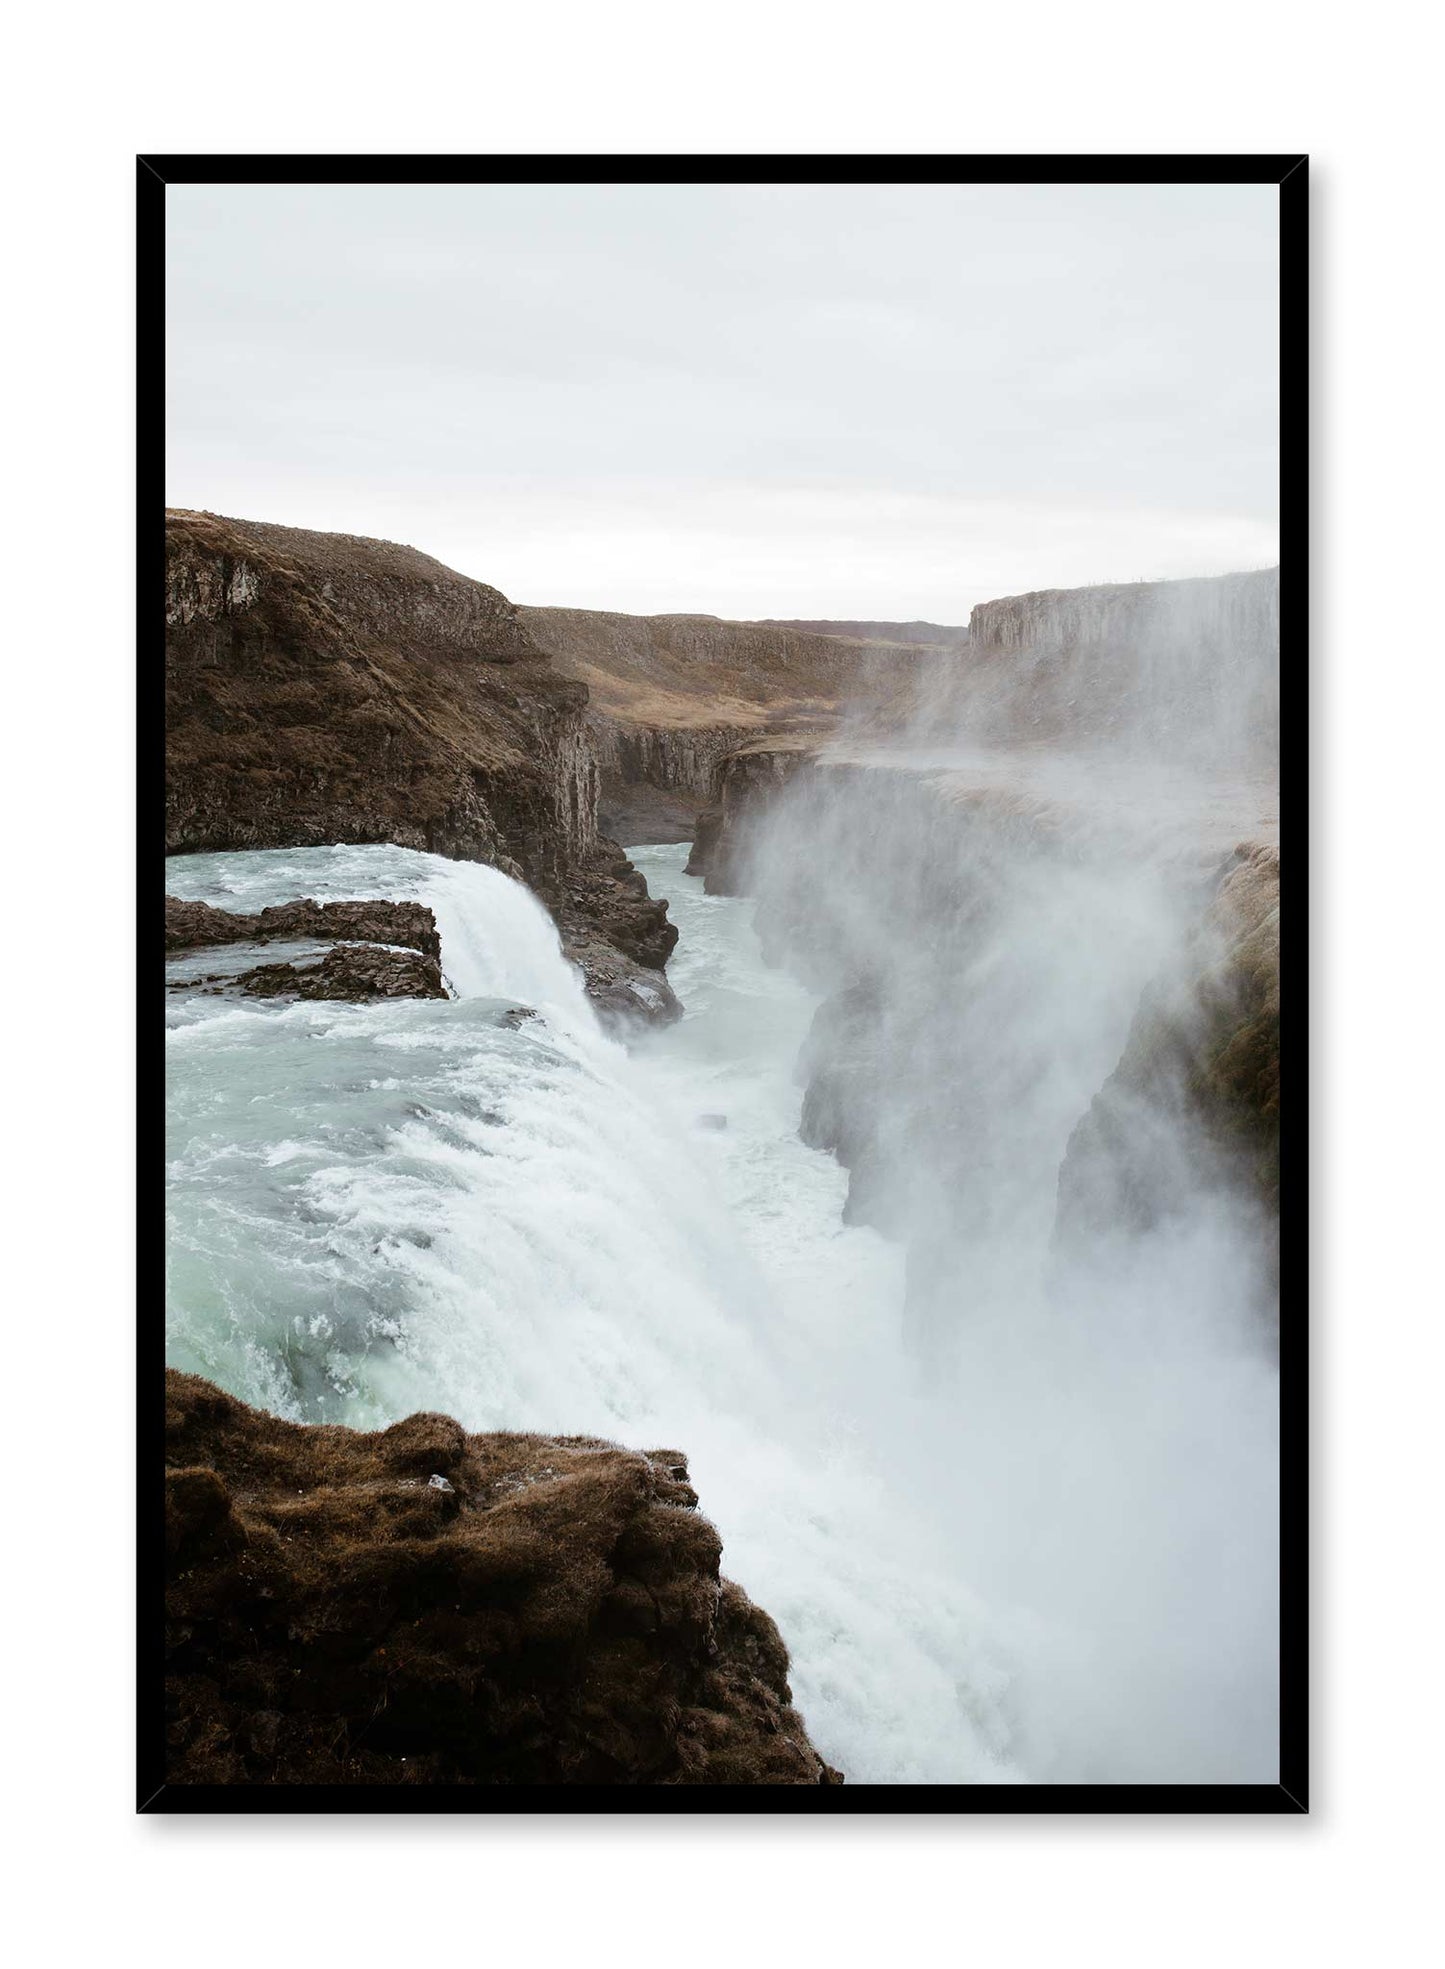 Scandinavian Waterfall' is a landscape photography poster by Opposite Wall of beautiful waterfalls in Iceland.